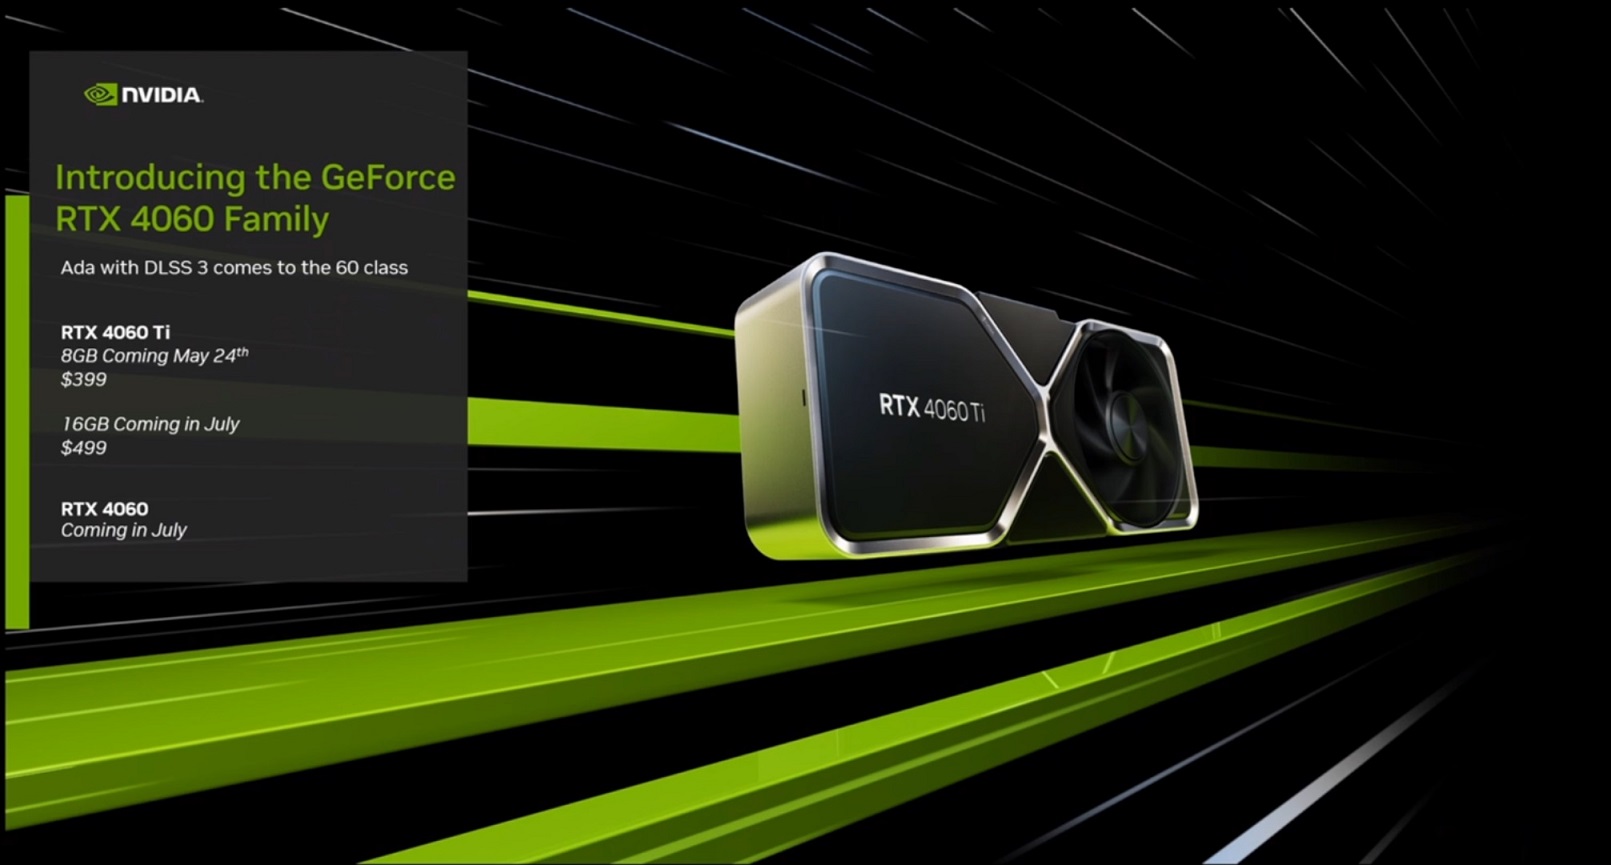 Nvidia Announces RTX 4060 Ti and RTX 4060 Graphics Cards, Priced